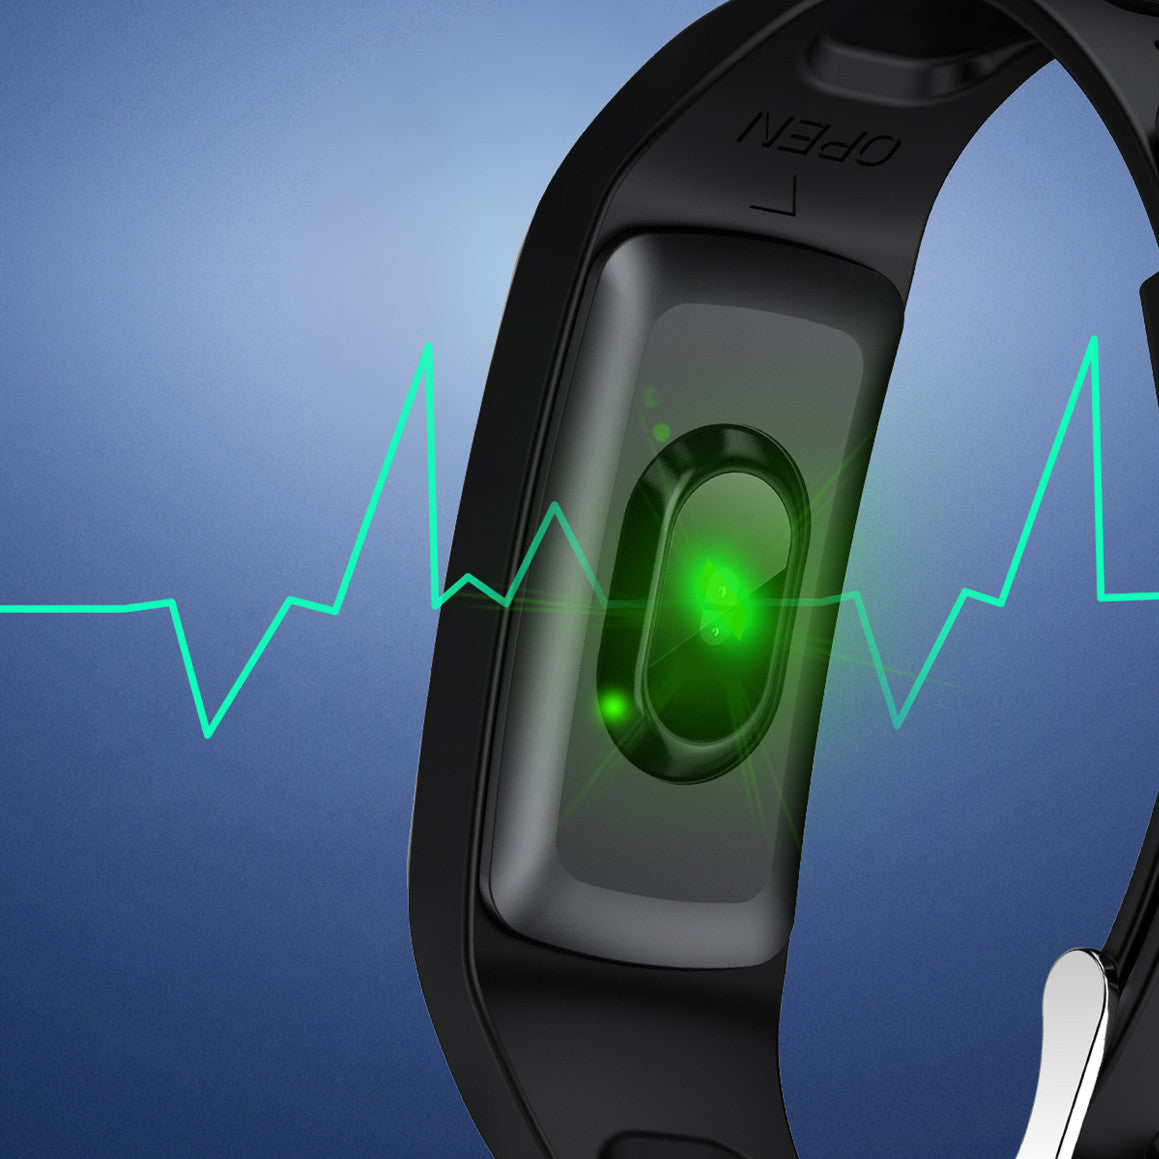 IP68 Waterproof Smart Bracelet With Large Heart Rate Display And Multi-sport Mode